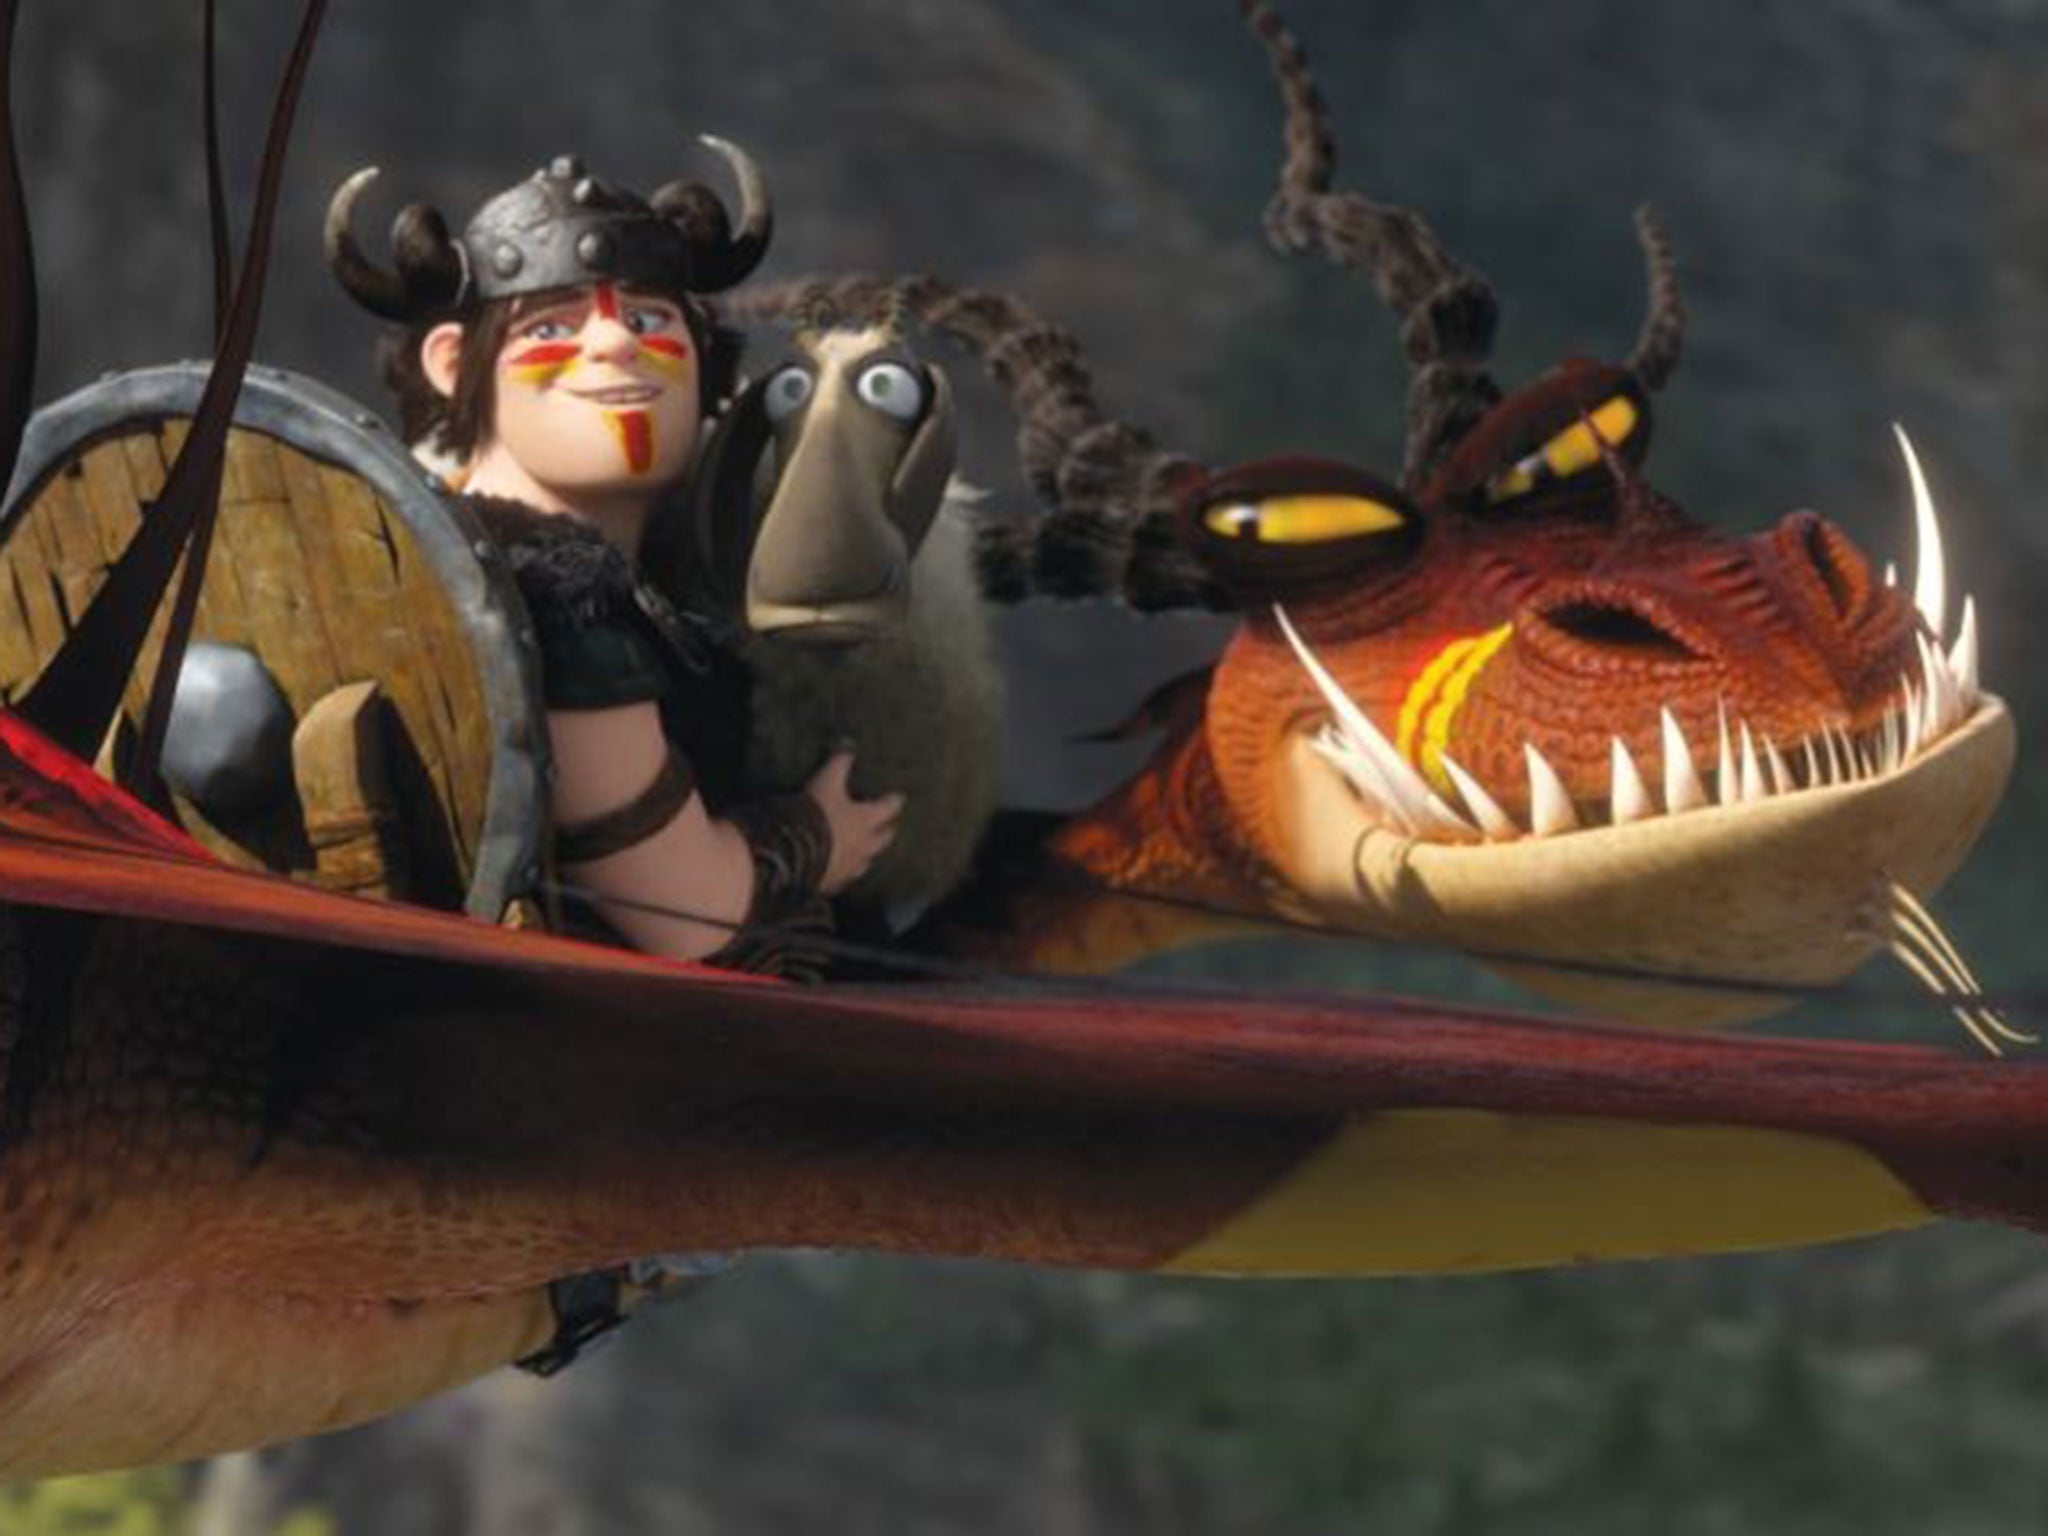 How to Train Your Dragon 2 is likely to win